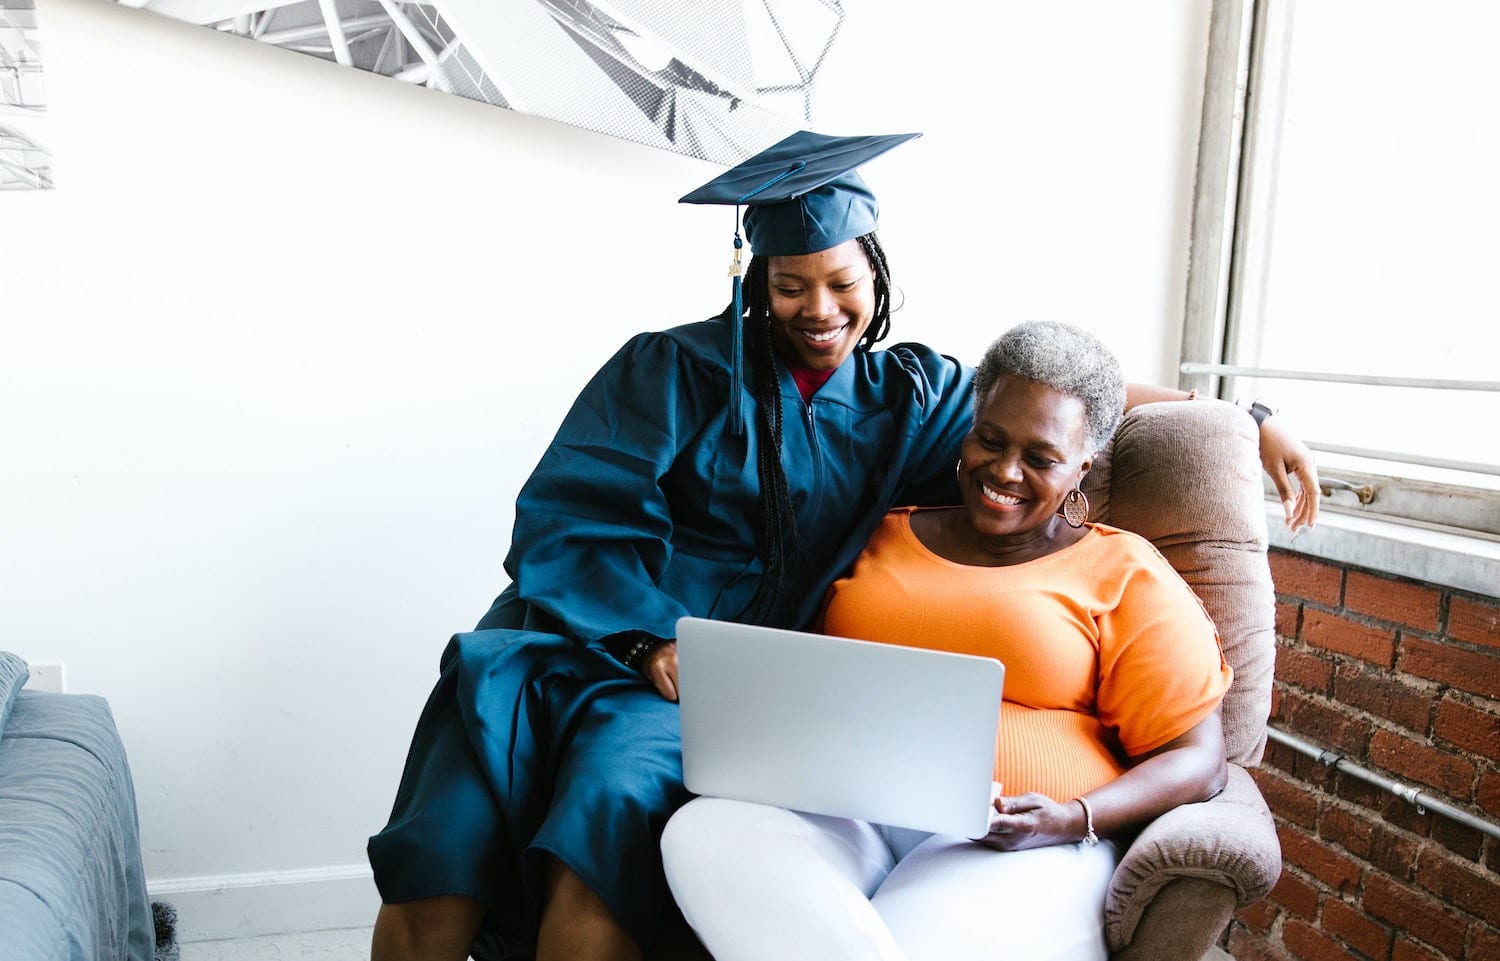 Image of a student graduate and family member watching a graduation ceremony on their laptop.